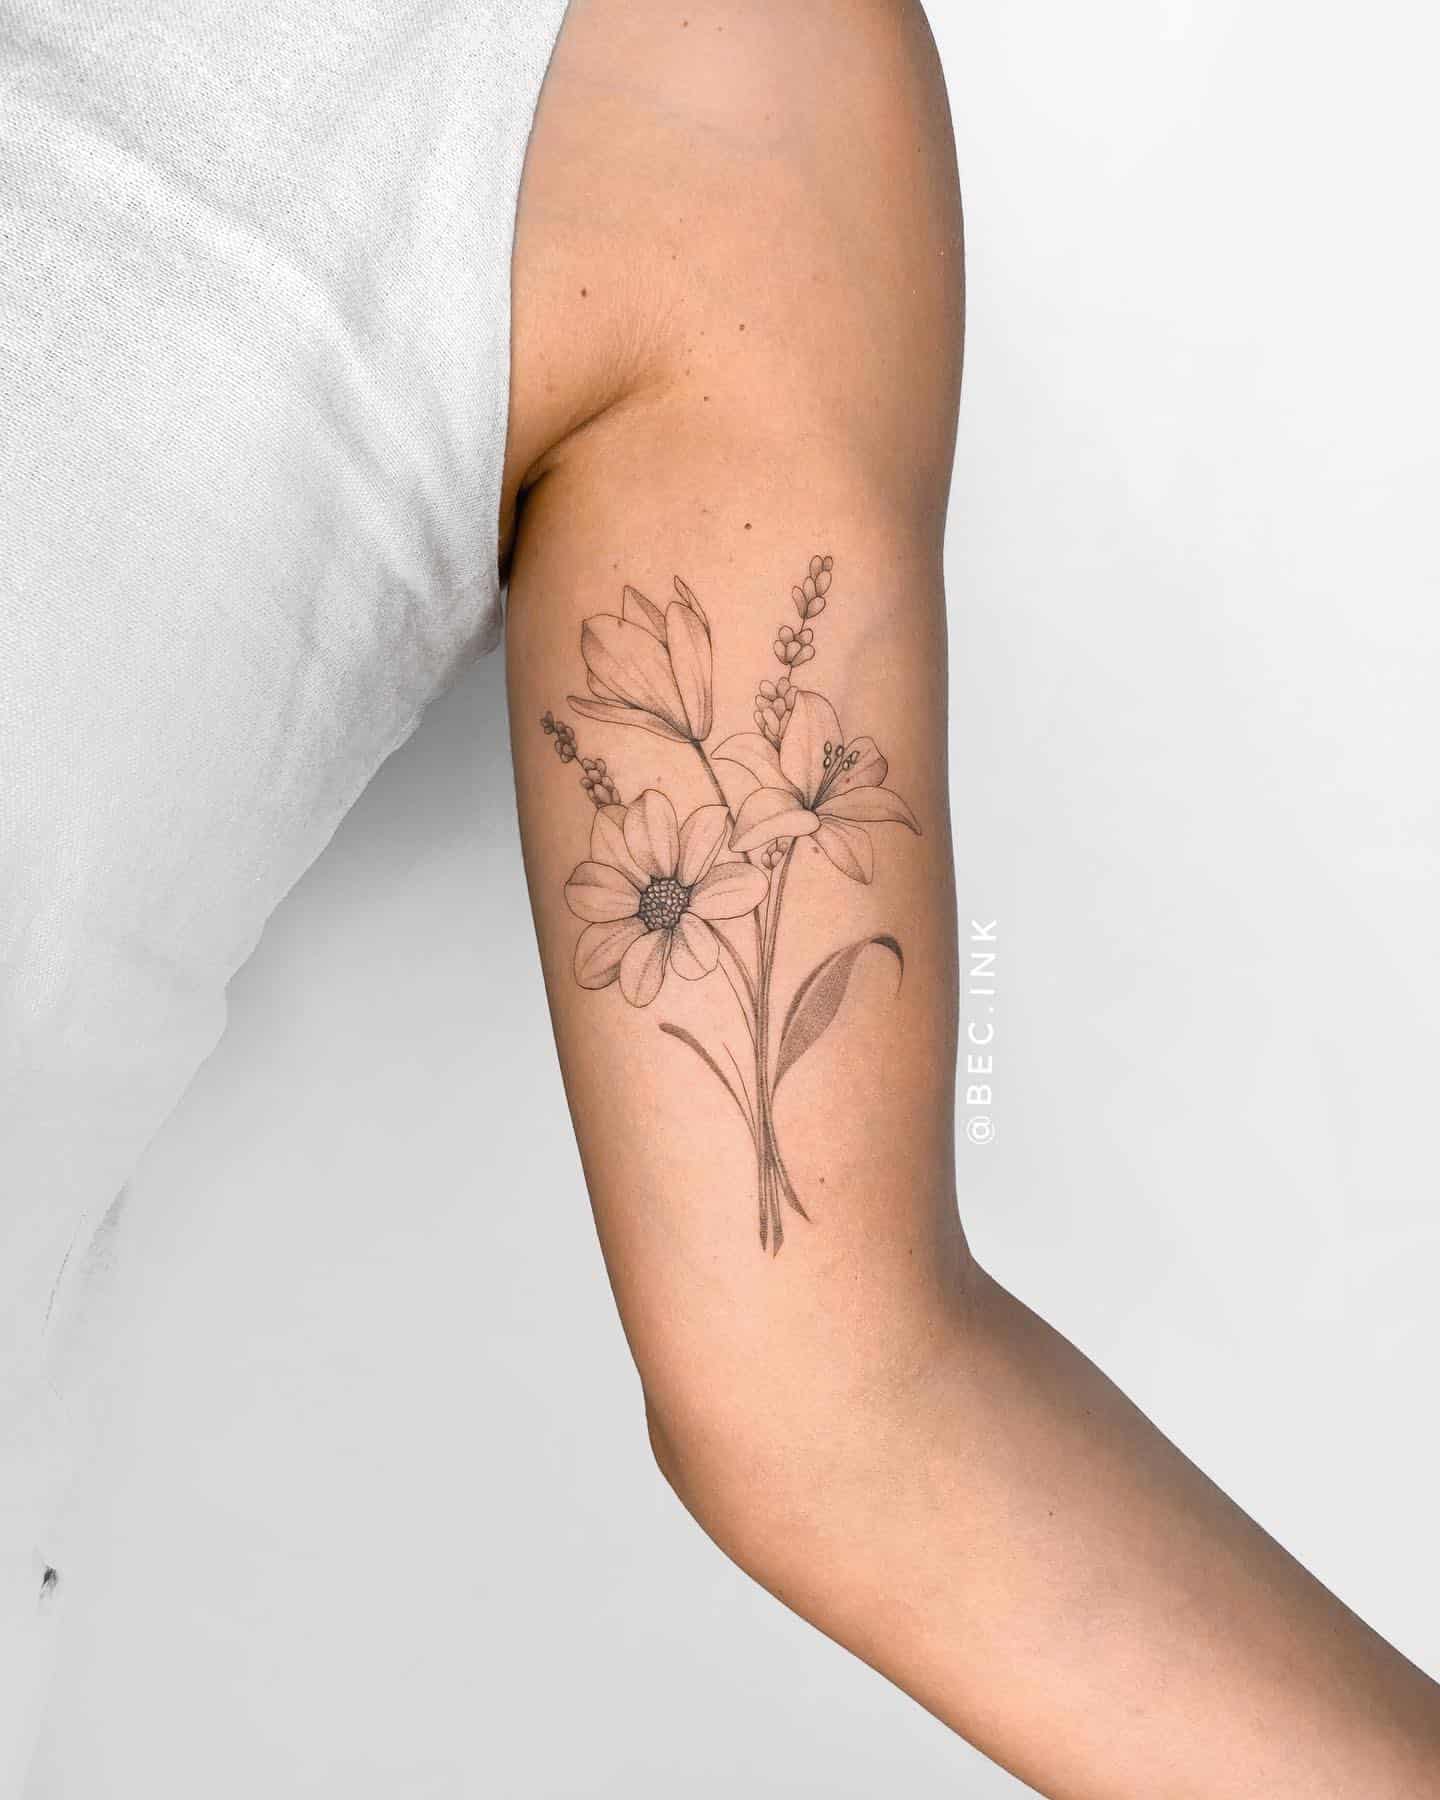 Floral Tattoos by Lindsay April Mimic Delicate Pencil Sketches